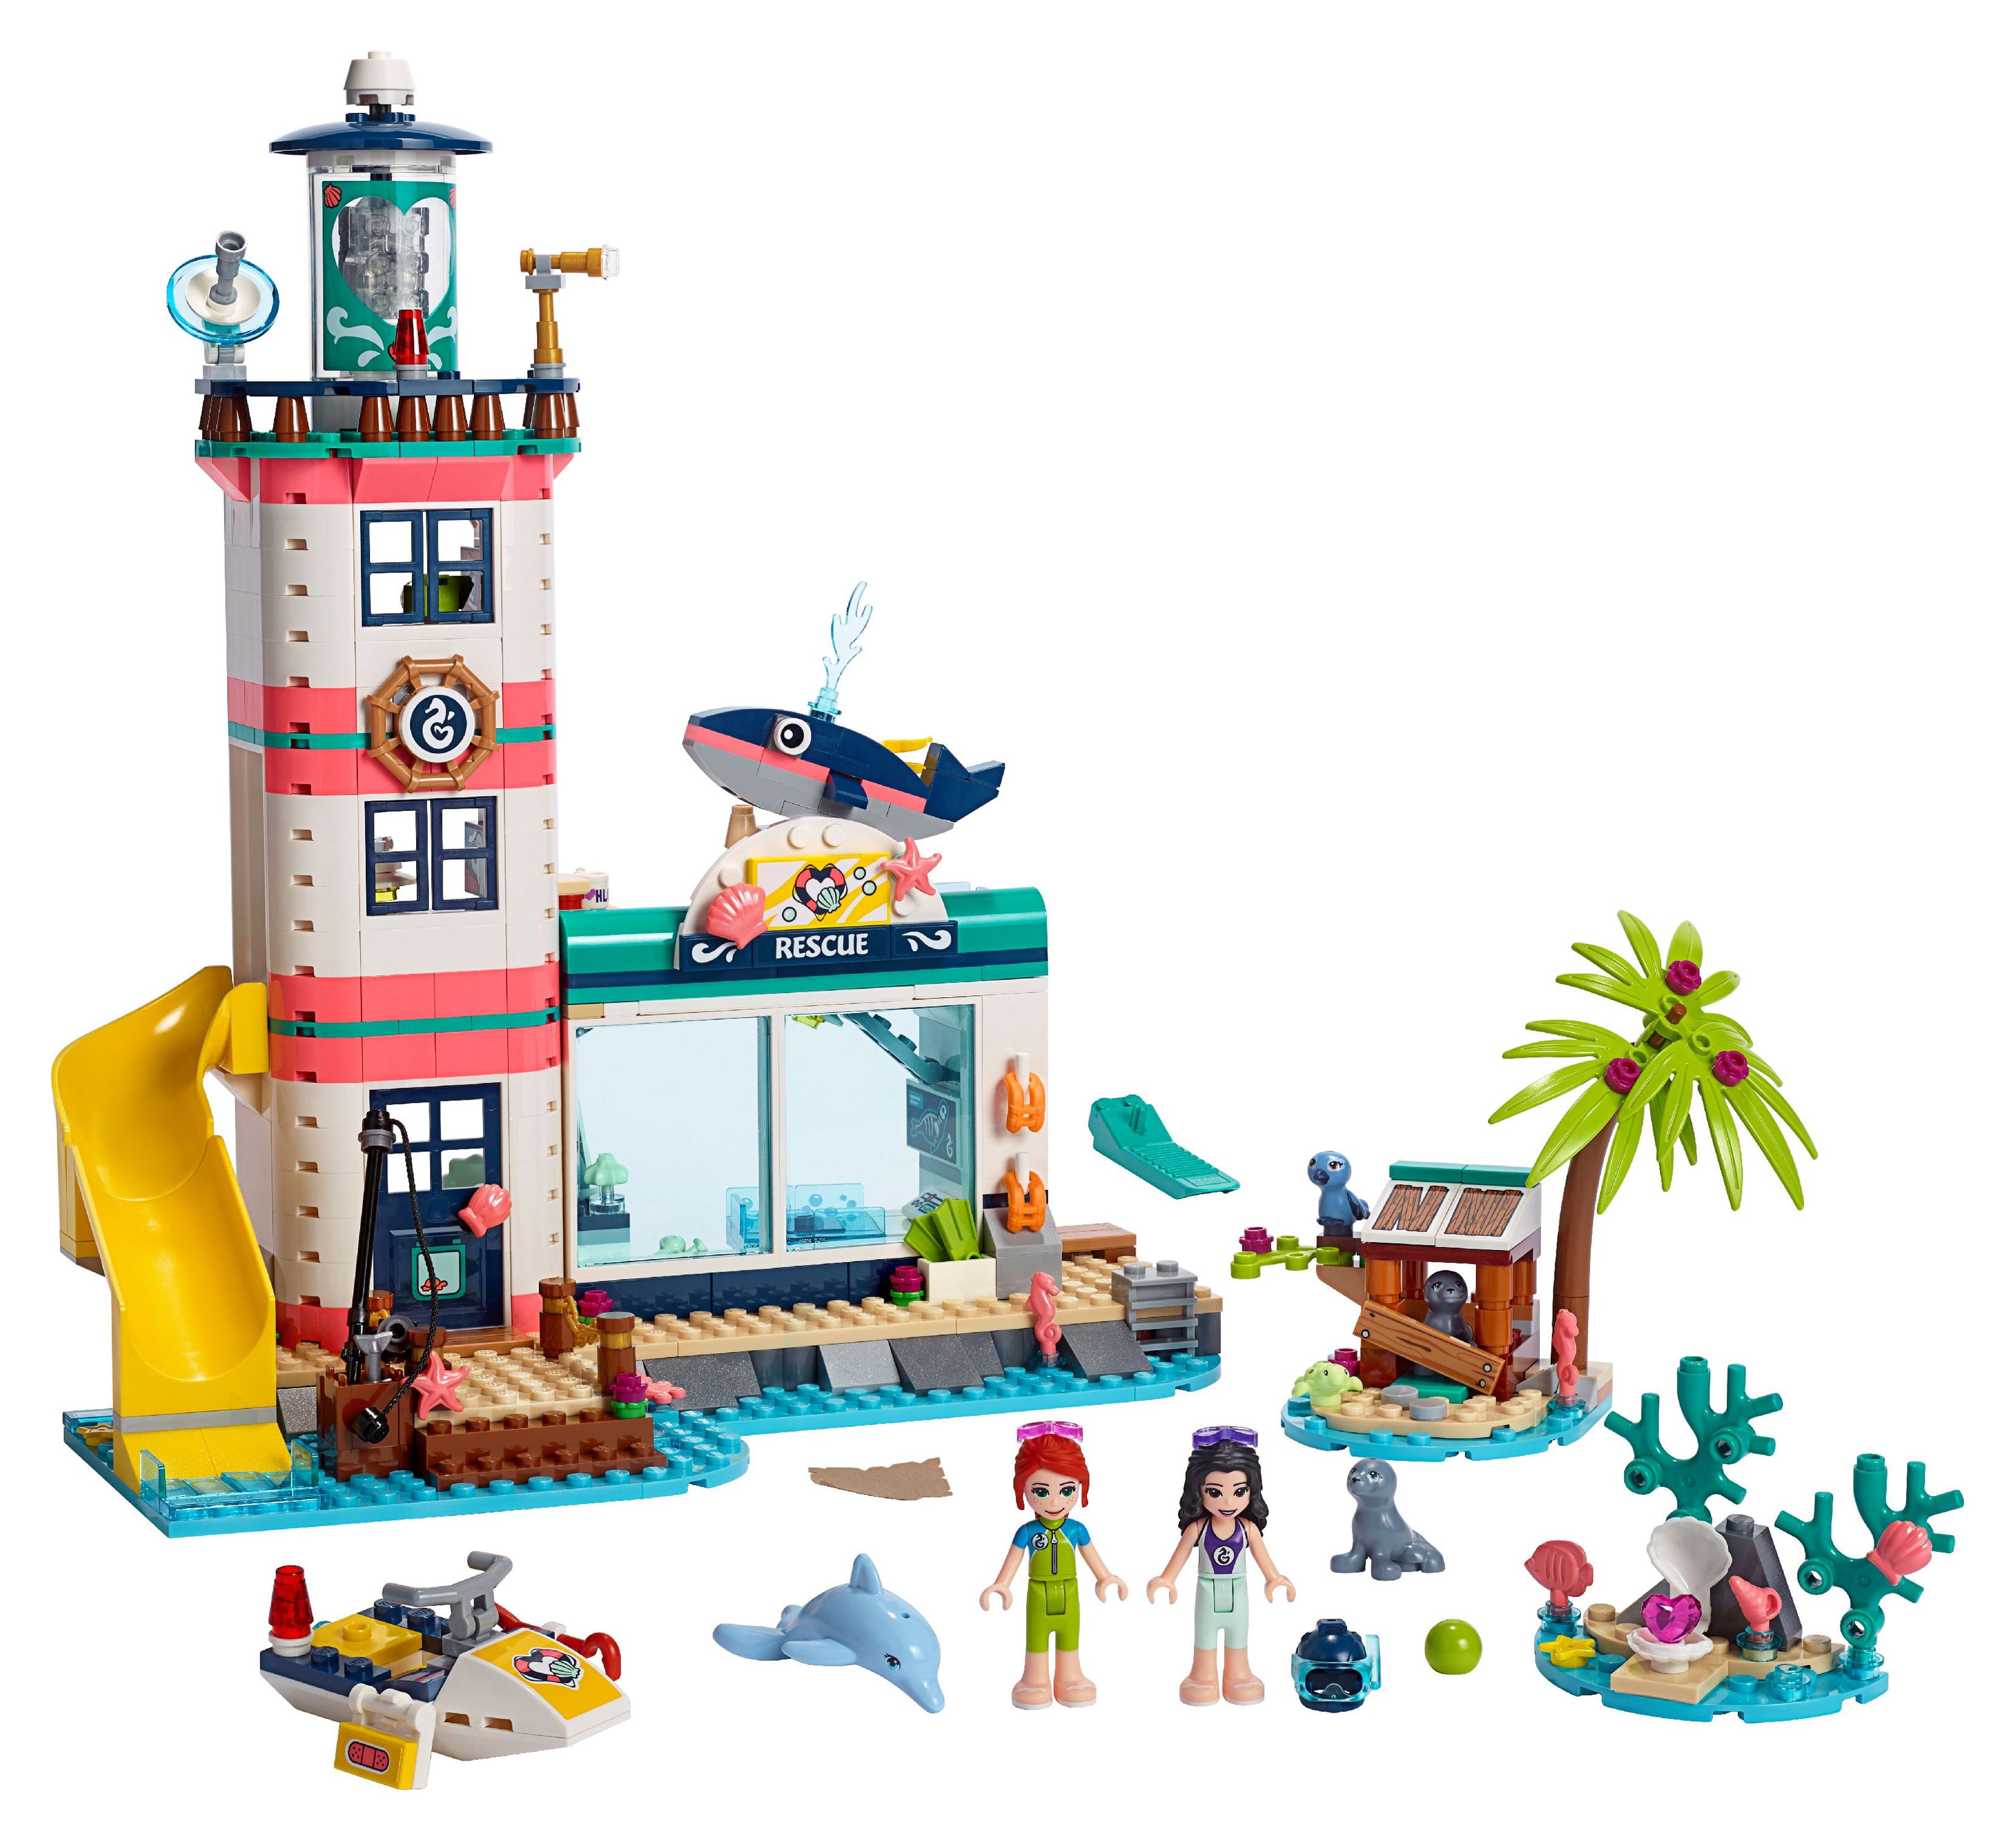 LEGO Friends Lighthouse Rescue Center 41380 Building Kit (602 Pieces) - image 3 of 8